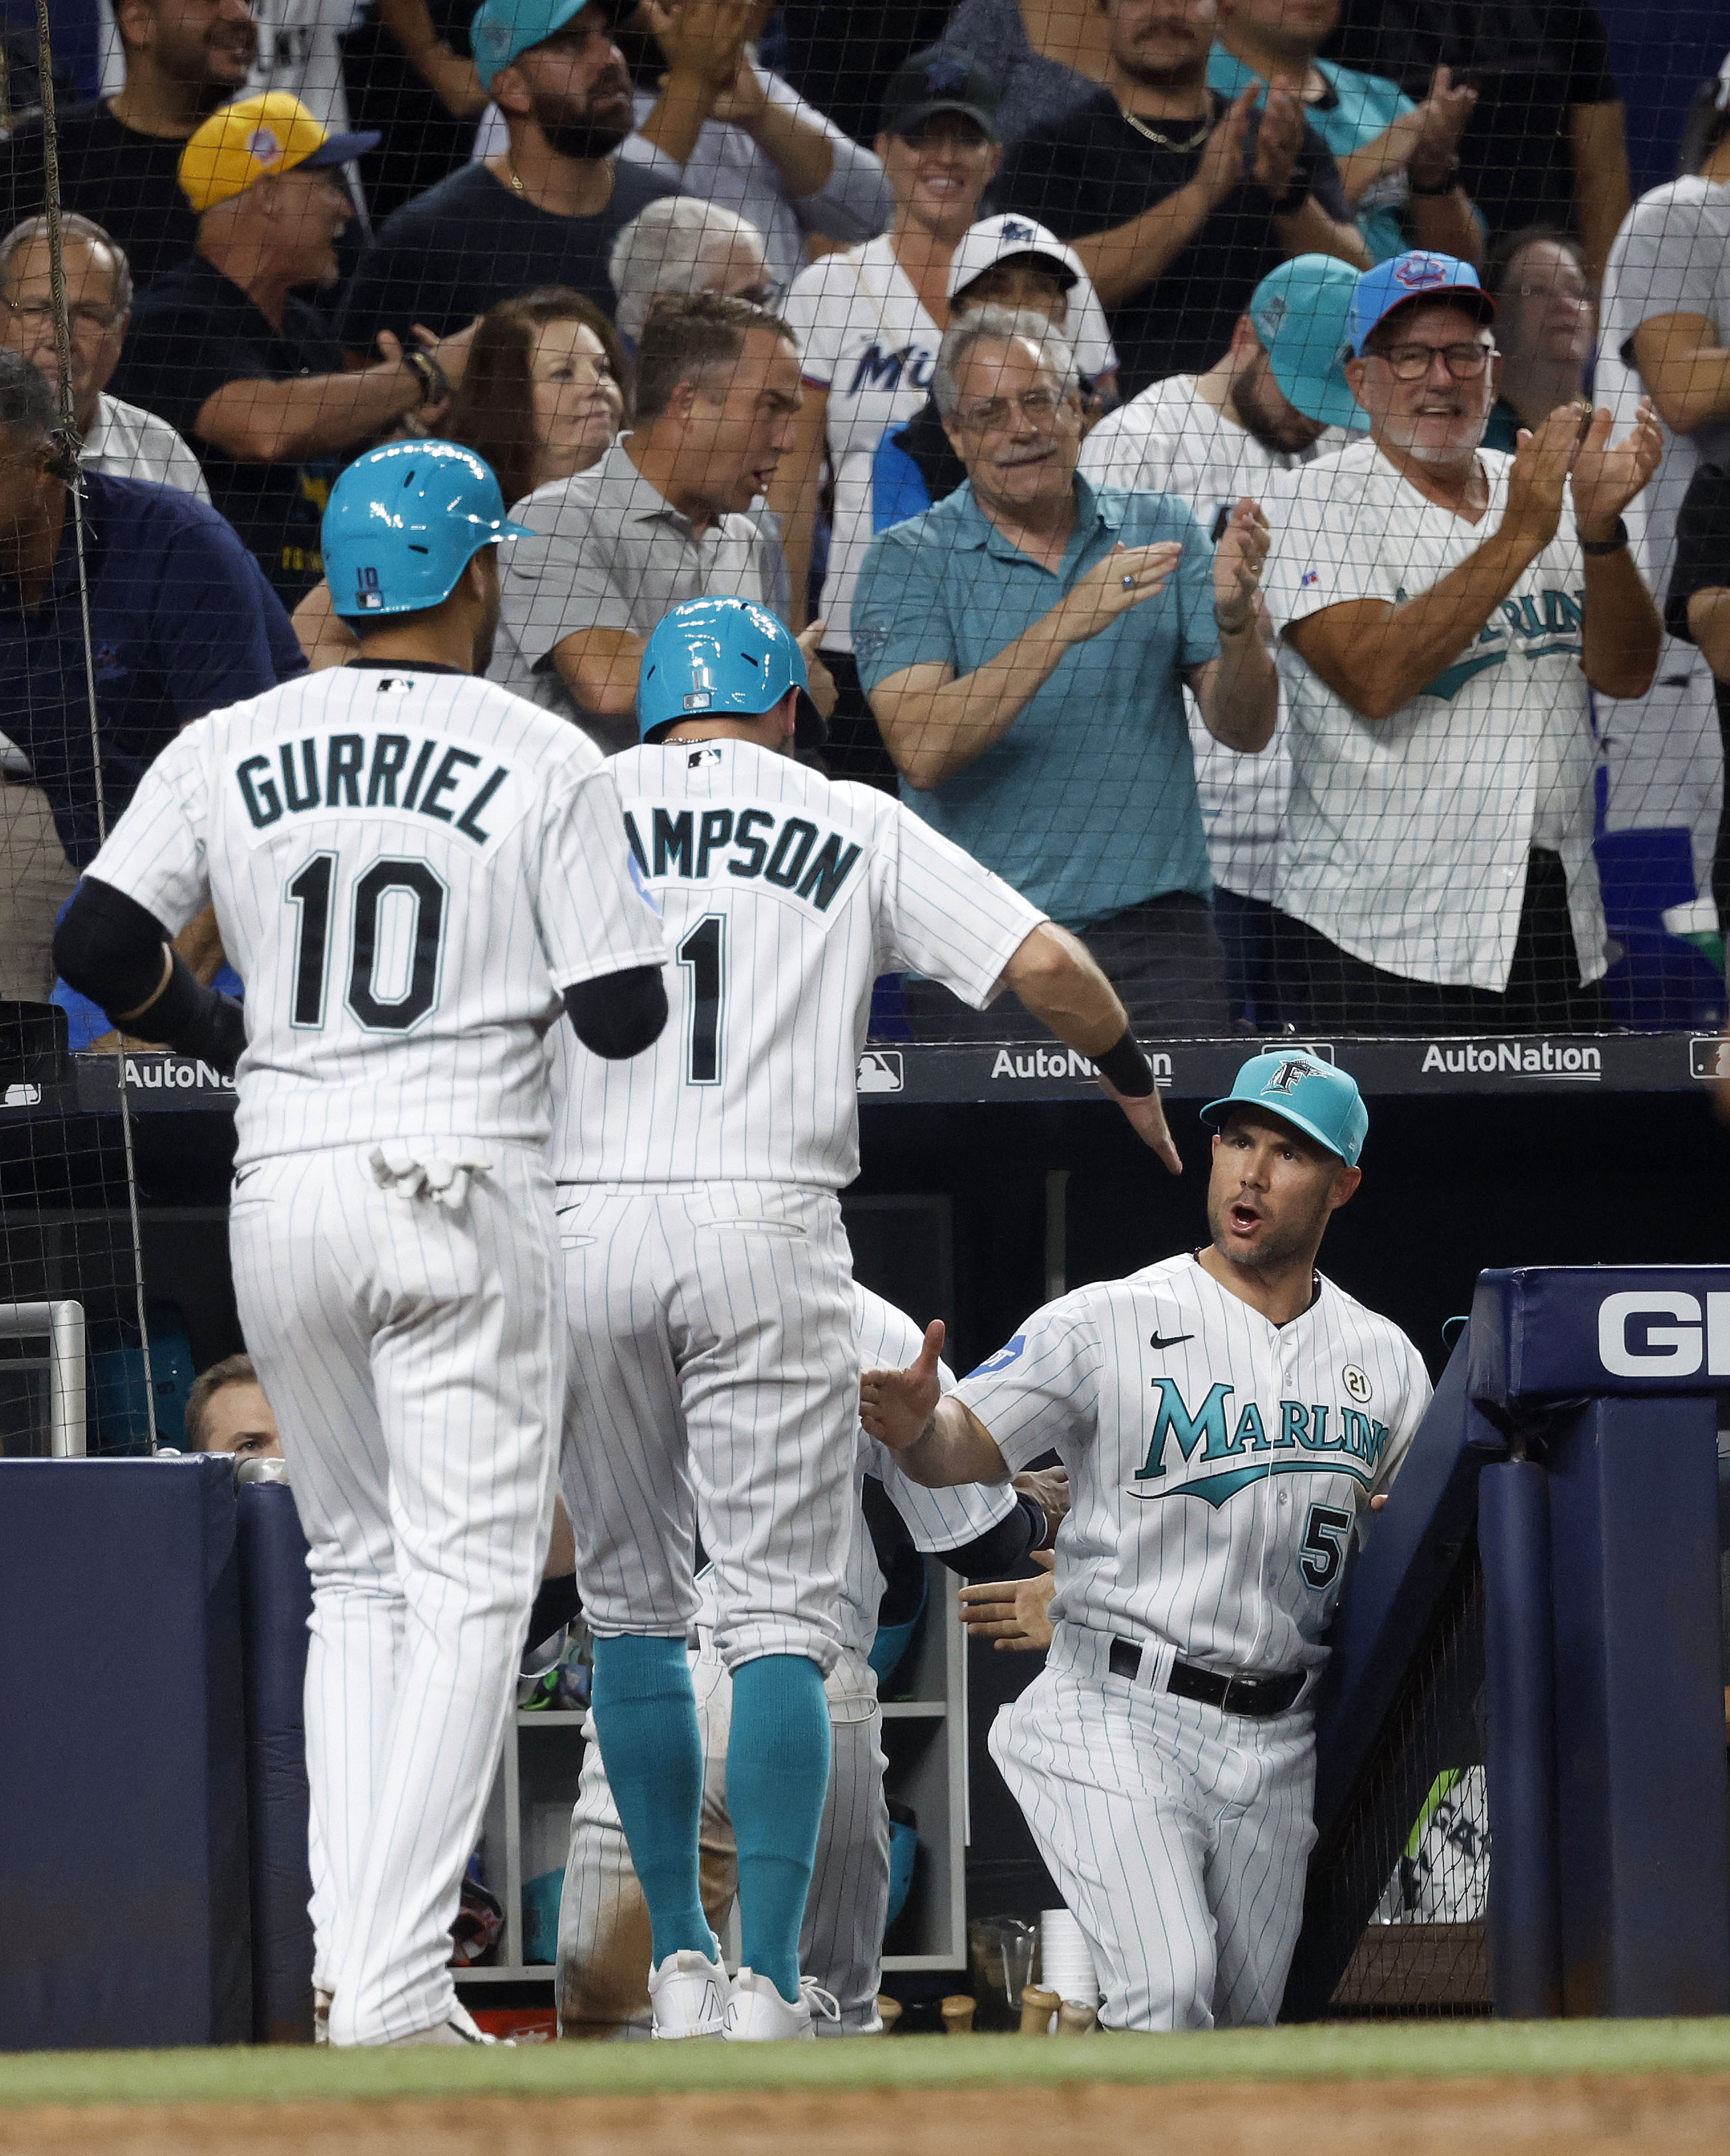 Stallings hits go-ahead double, Arraez homers twice in Marlins' 9-6 win  over Braves